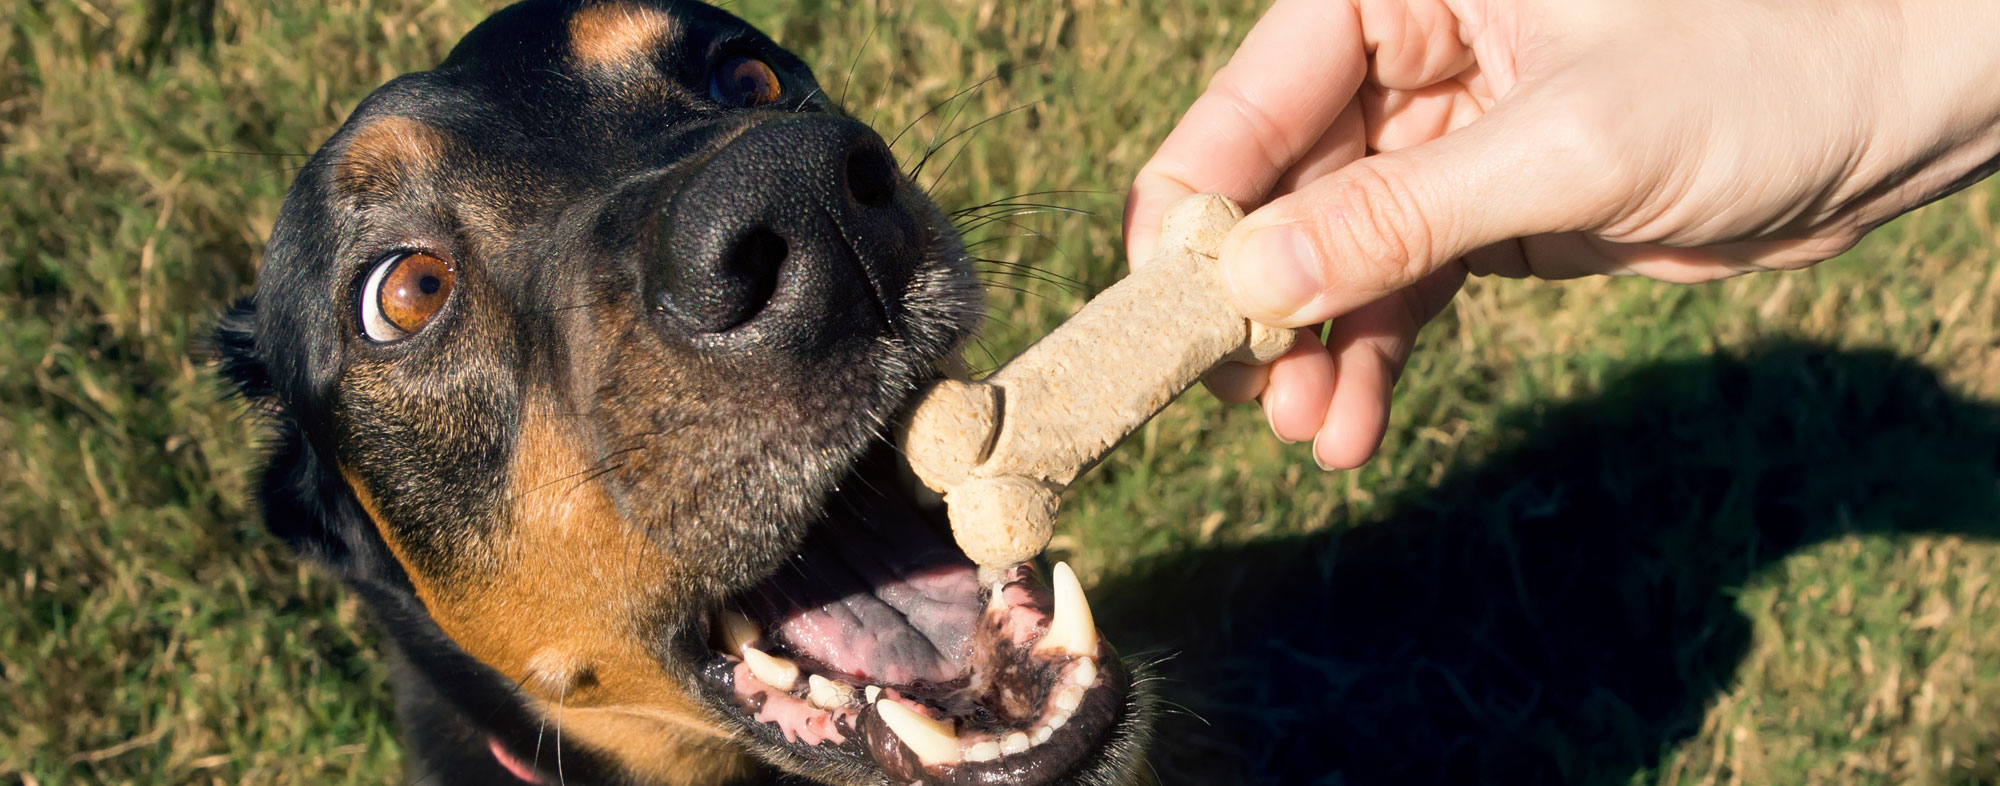 When feeding your dog treats, be mindful of their daily caloric intake